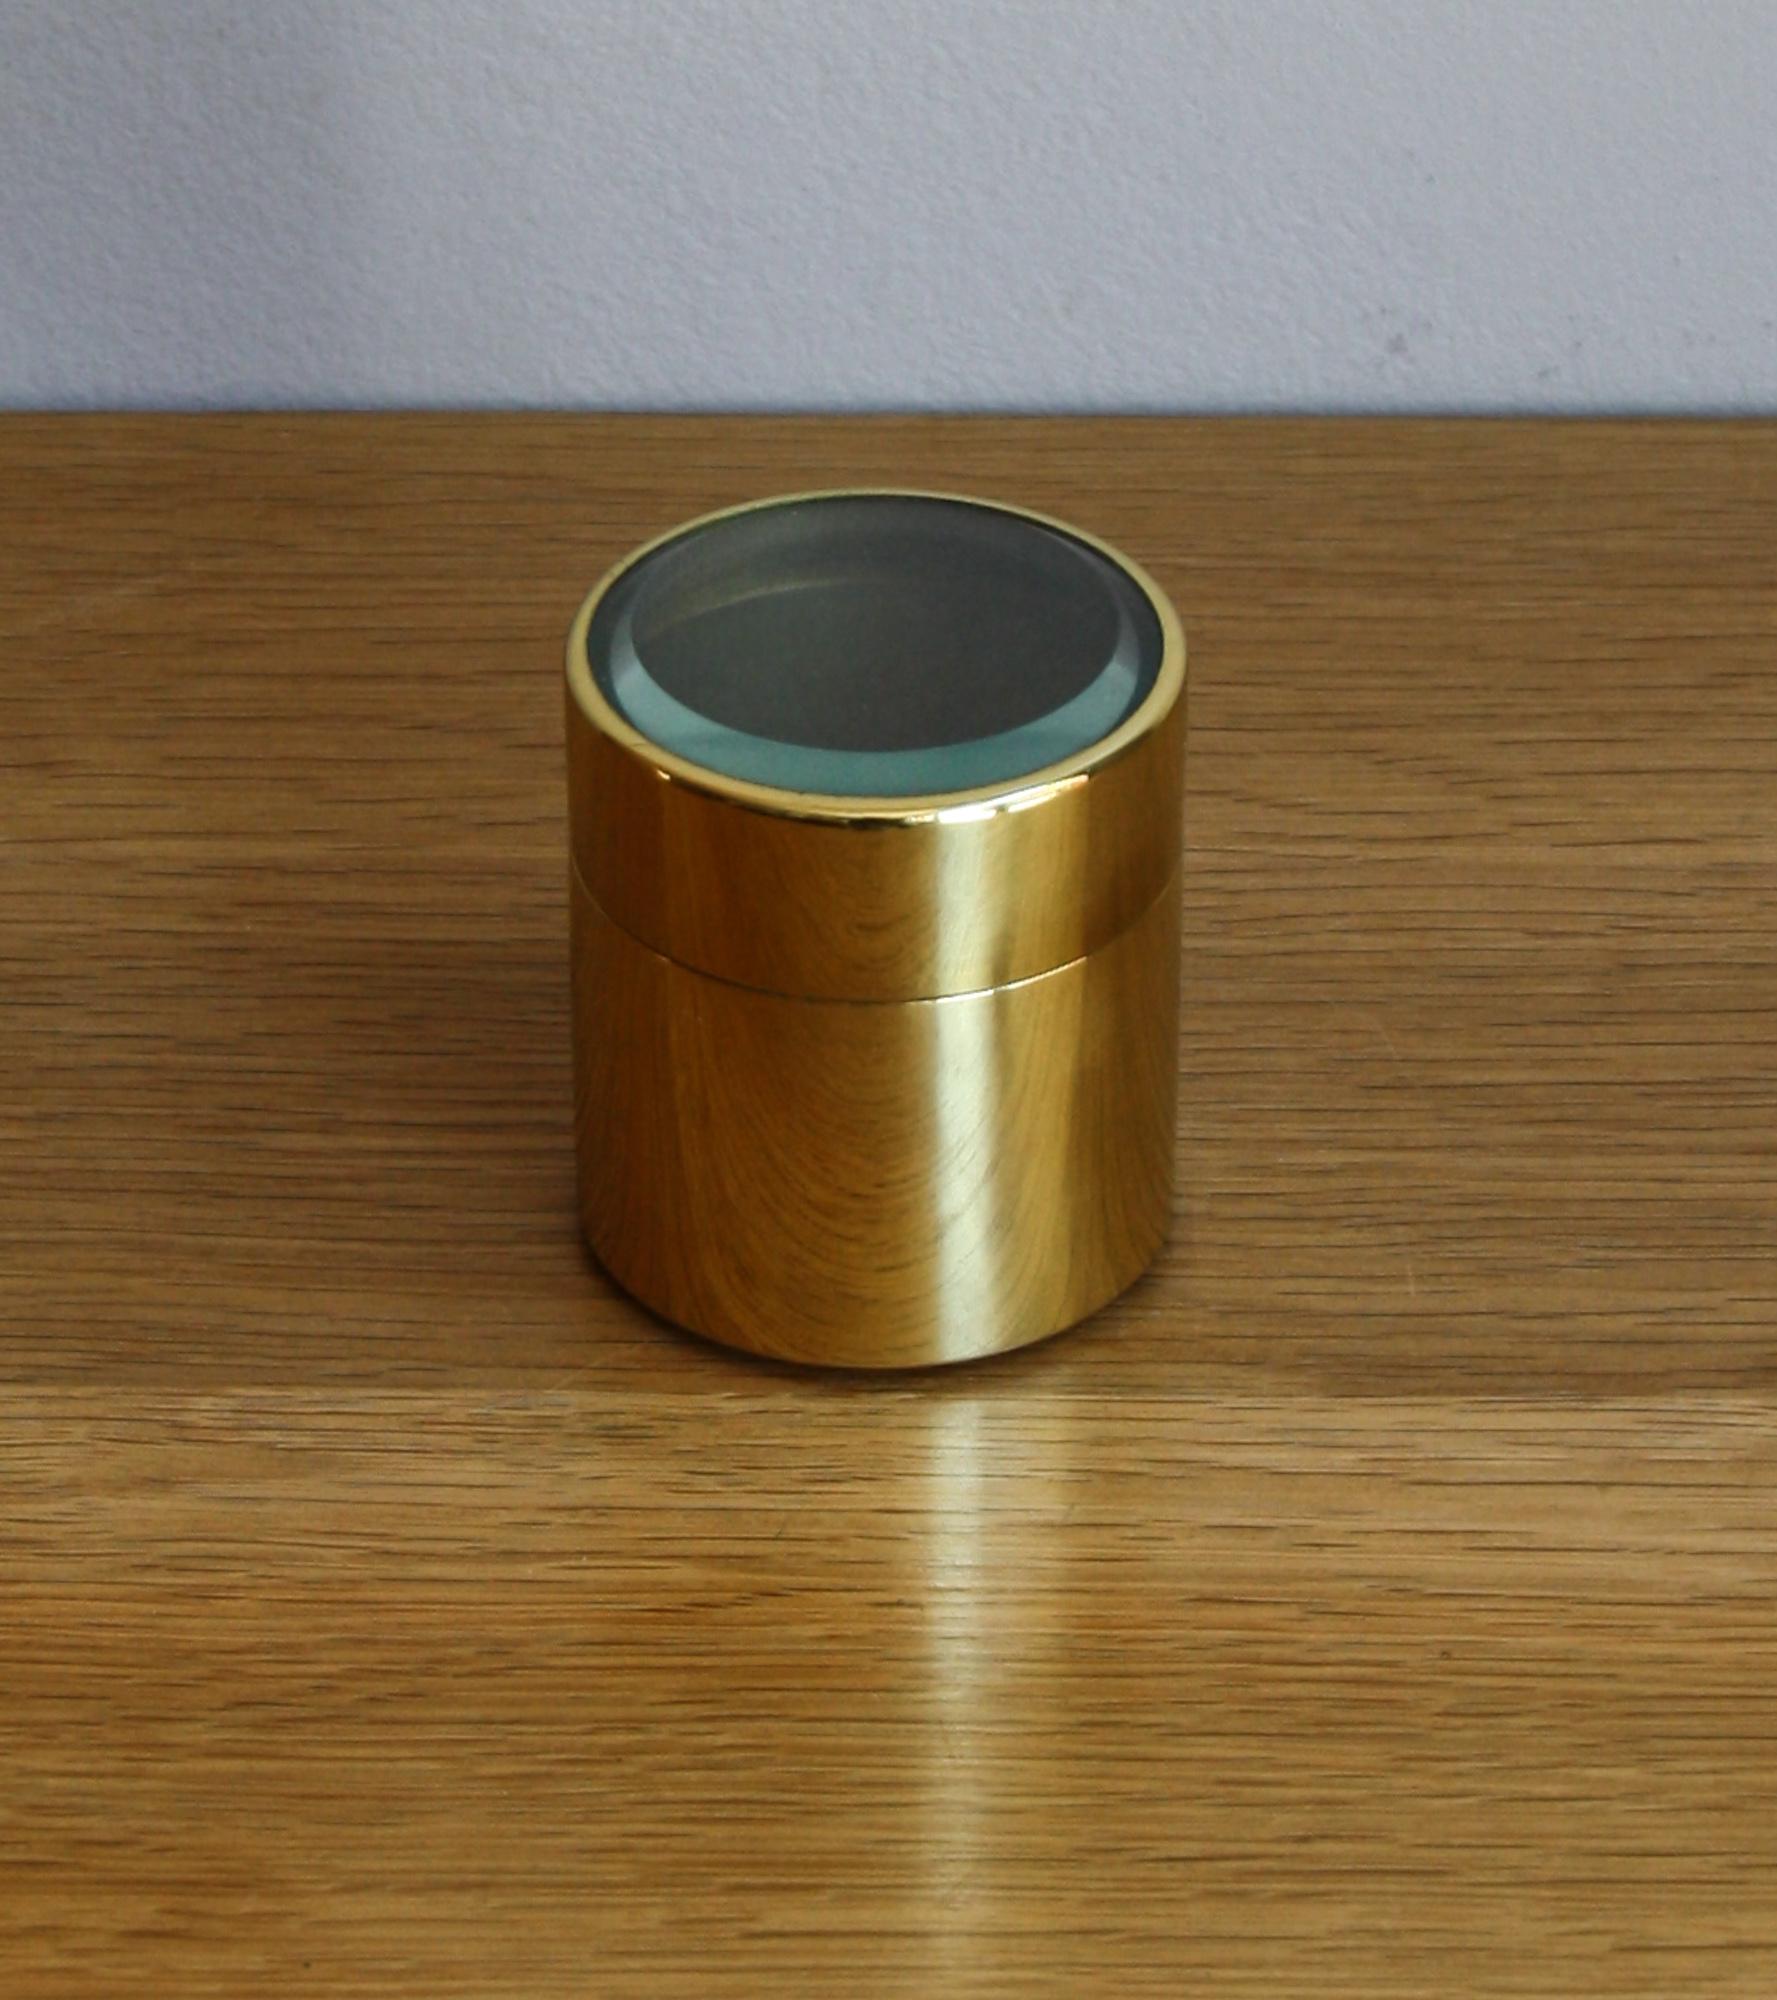 A vintage canister by Carl Auböck Vienna, Austria, circa 1950.
Base and lid are made of glass and both have bevelled edges; the canister itself is made of formed brass.
In excellent condition.